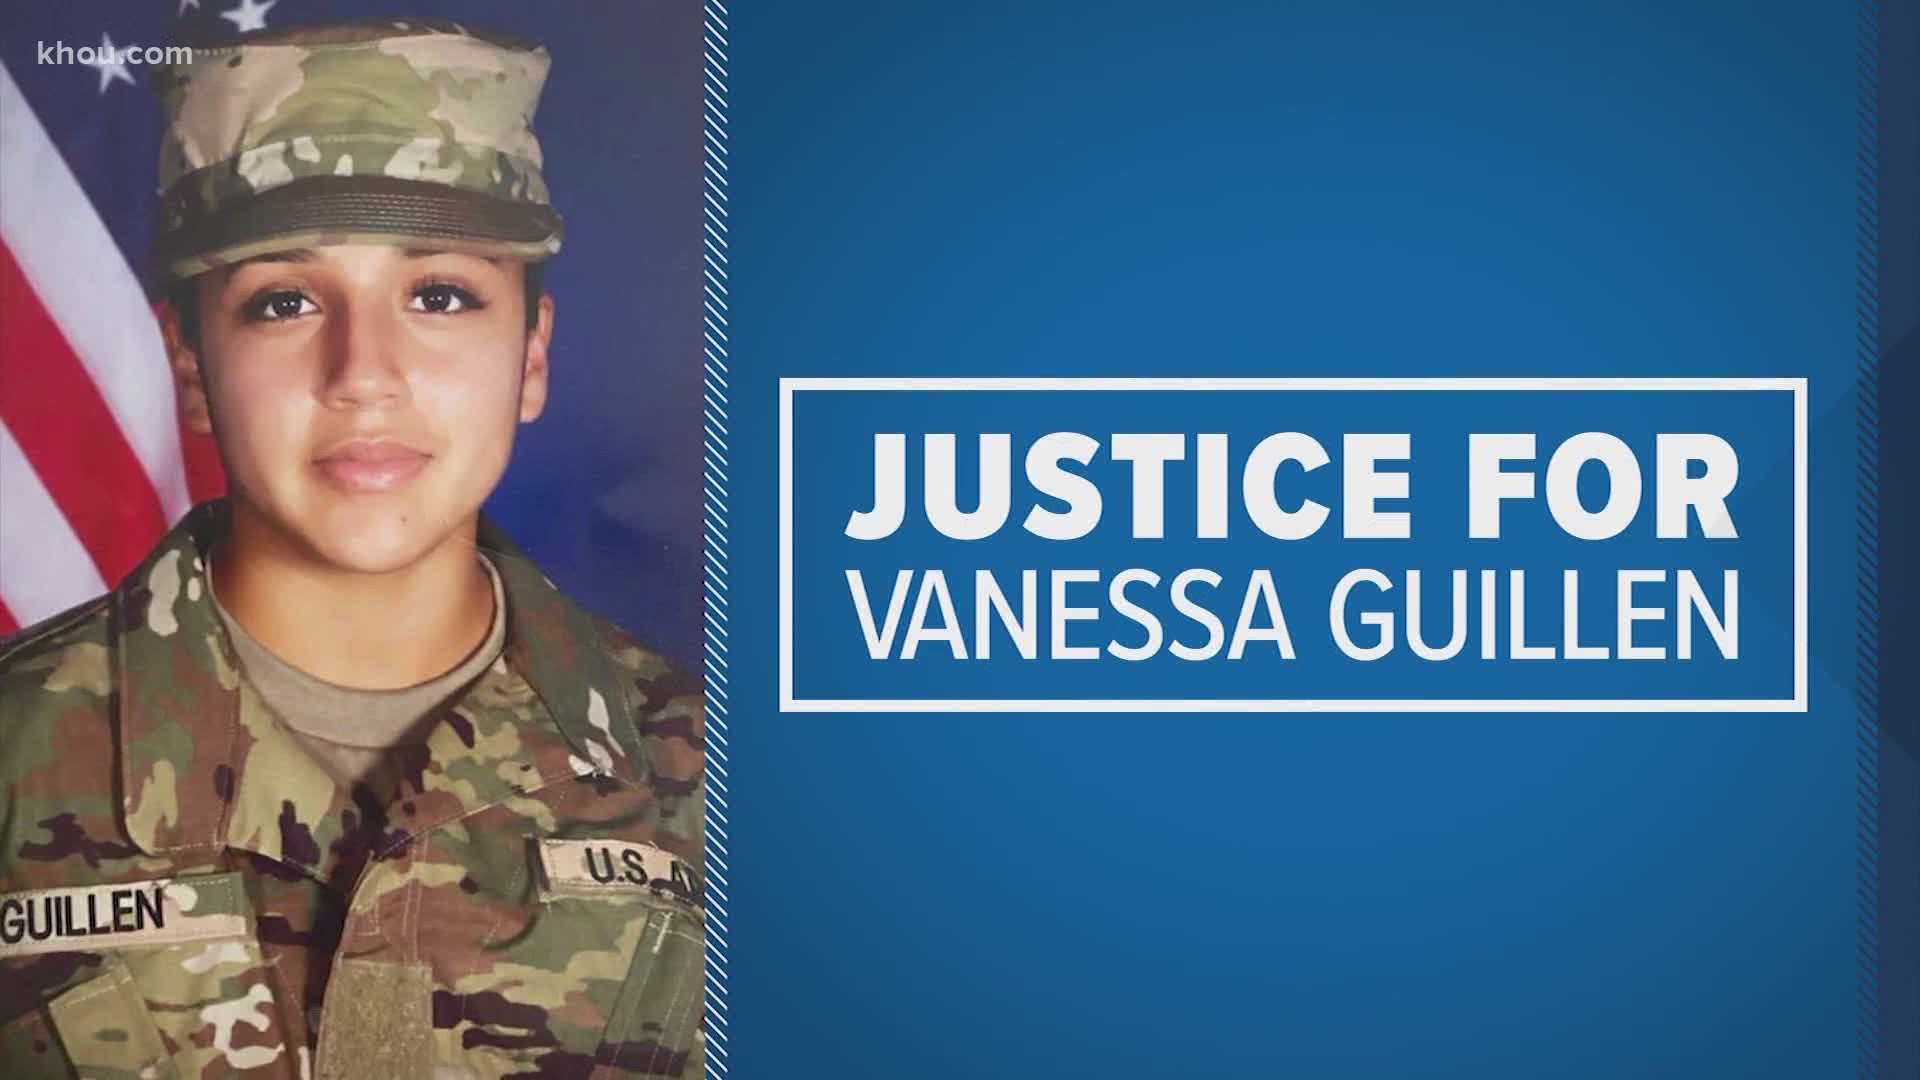 A look at the latest news on the Vanessa Guillen case.